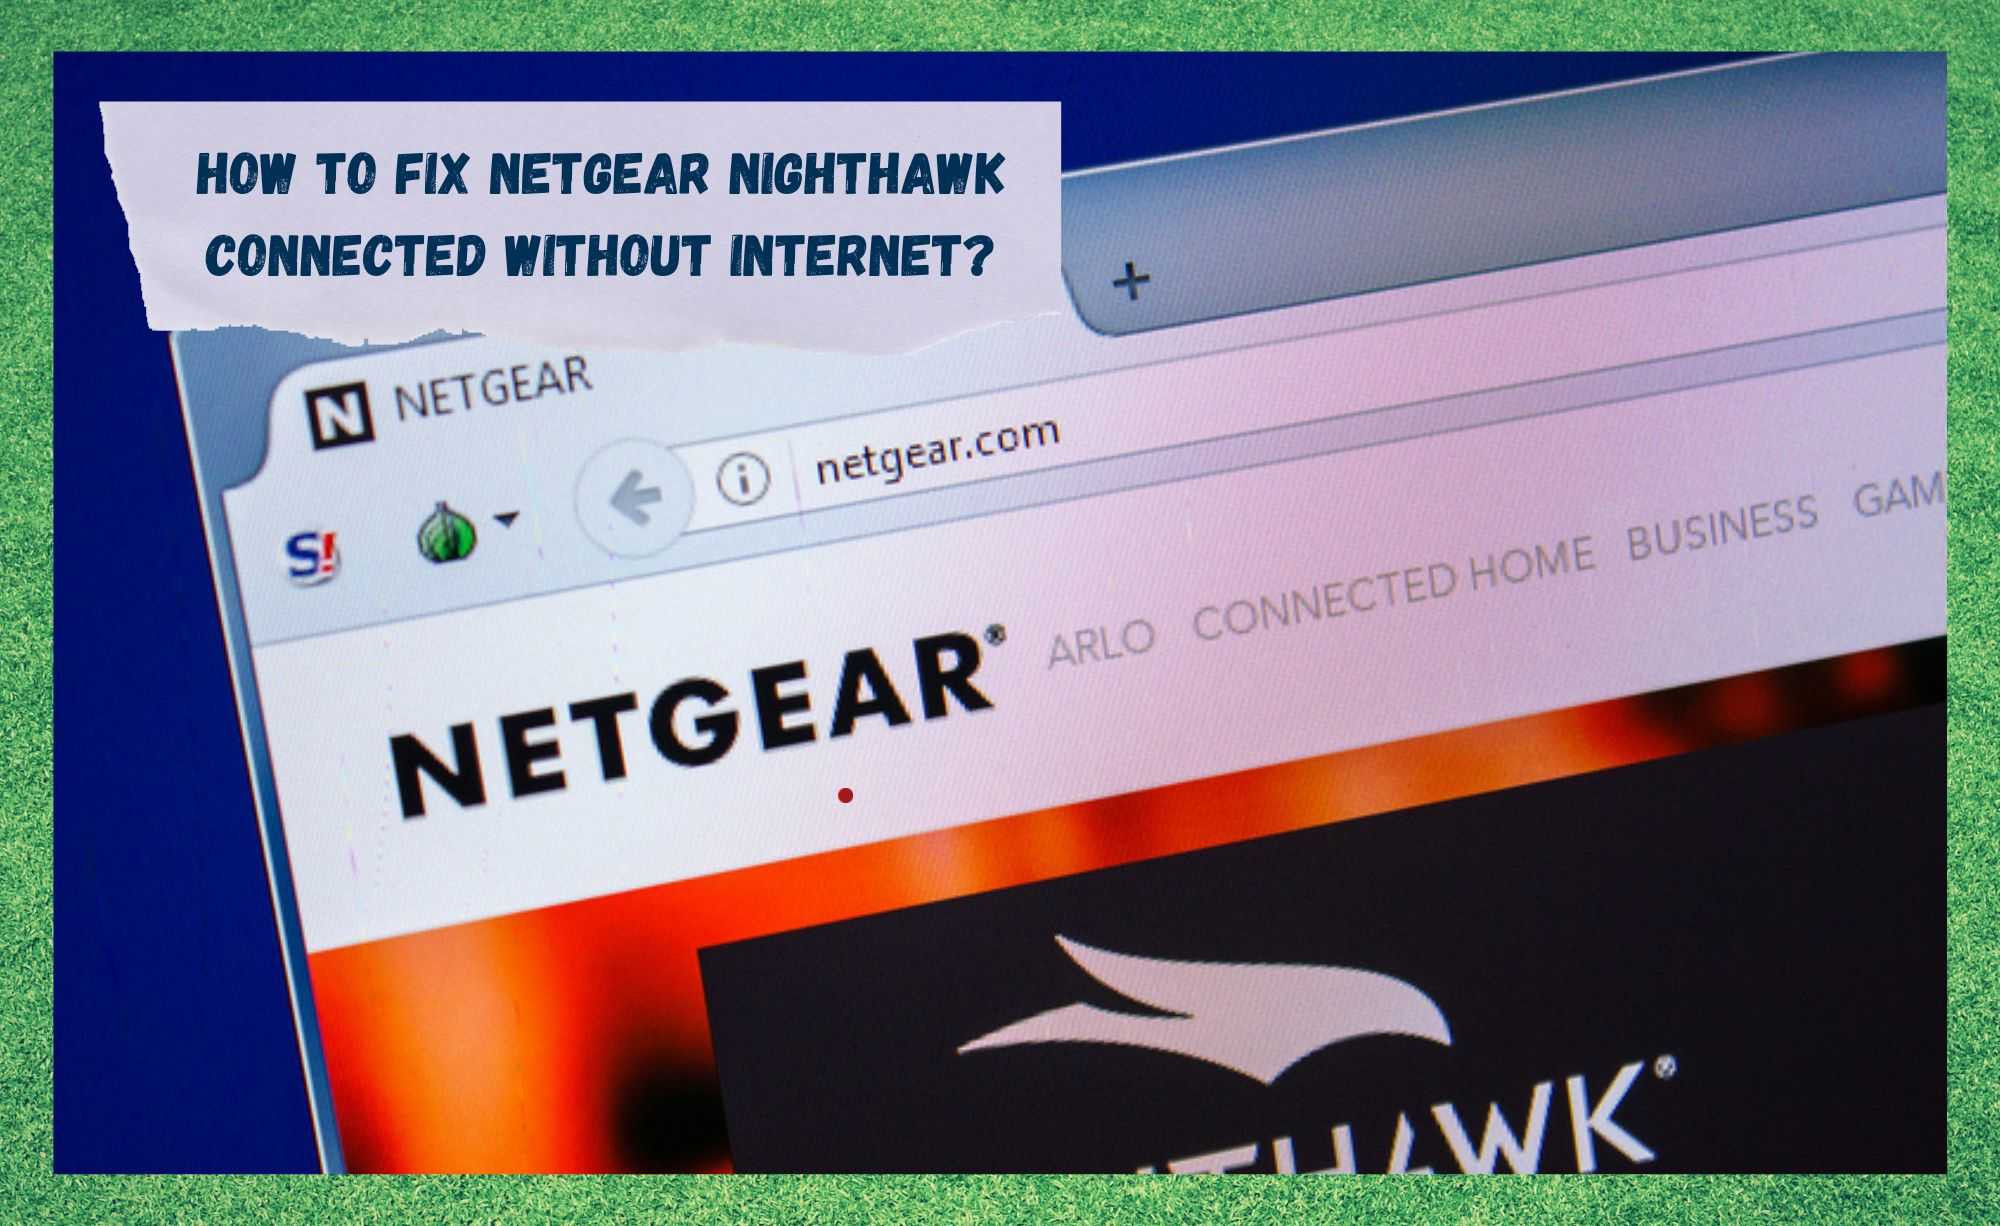 netgear nighthawk connected without internet